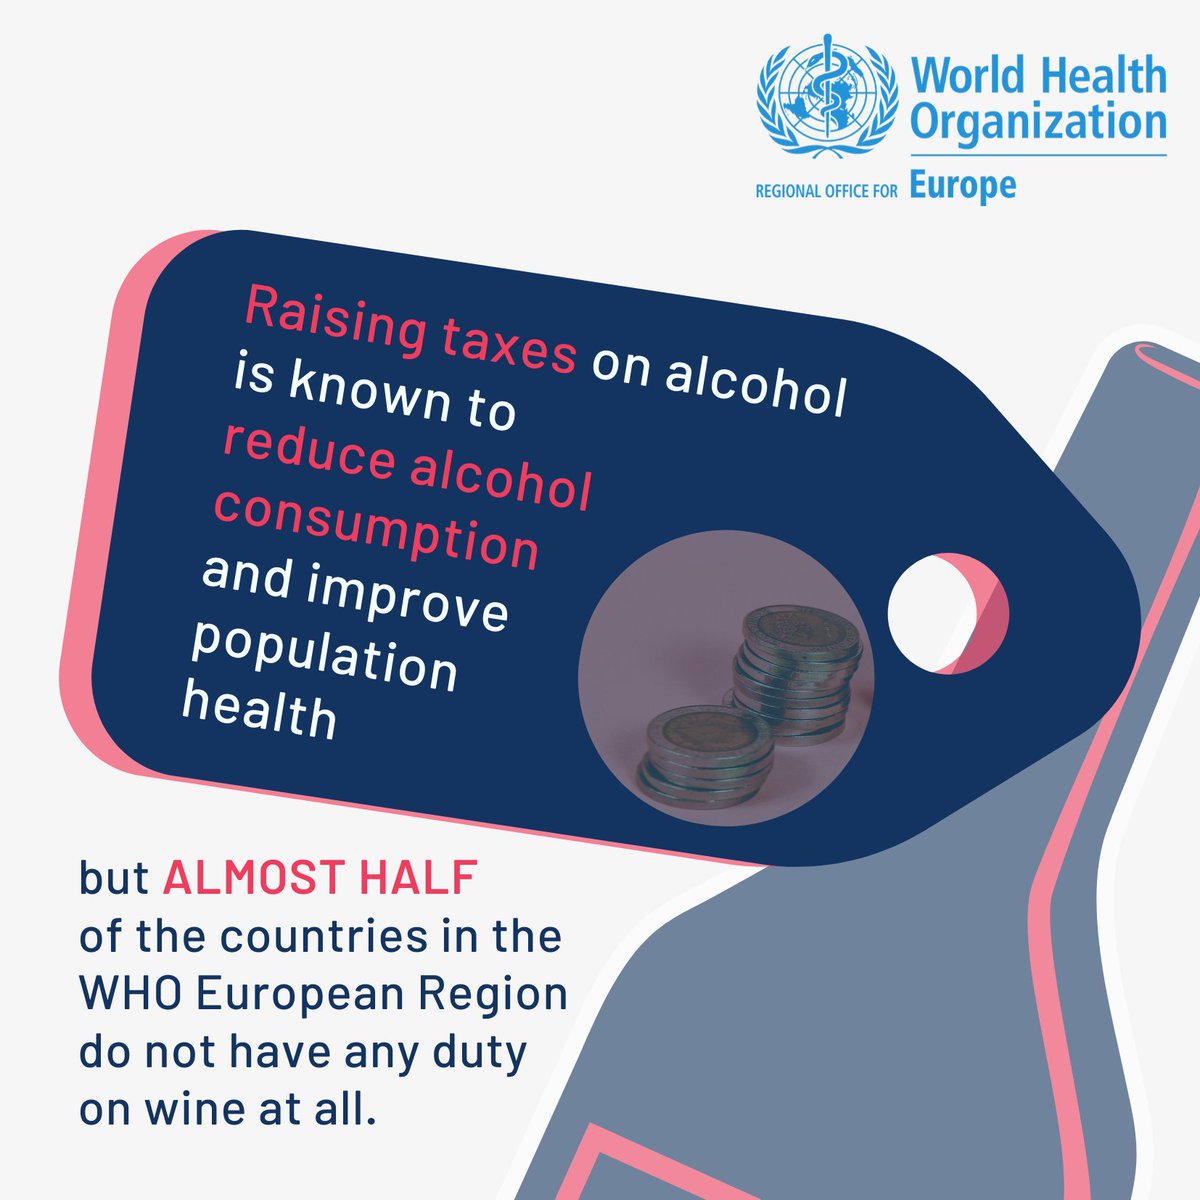 Raising alcohol taxes is known to reduce  #alcohol consumption and improve population health, but  out of  countries in the WHO European Region do not have any duty on wine at all.